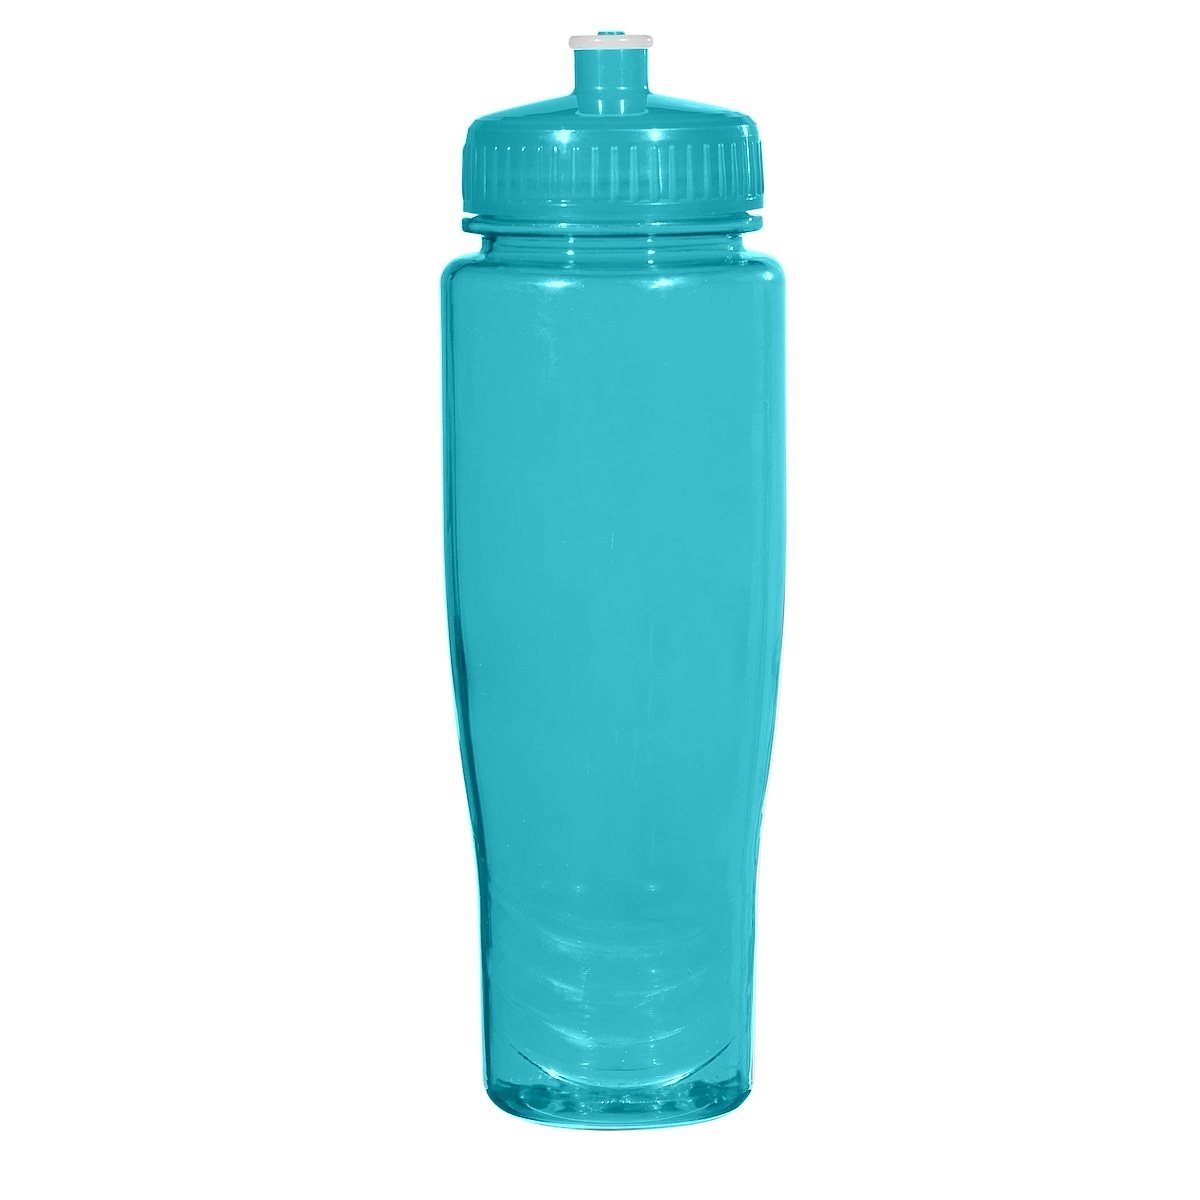 What’s the best way to clean a water bottle?